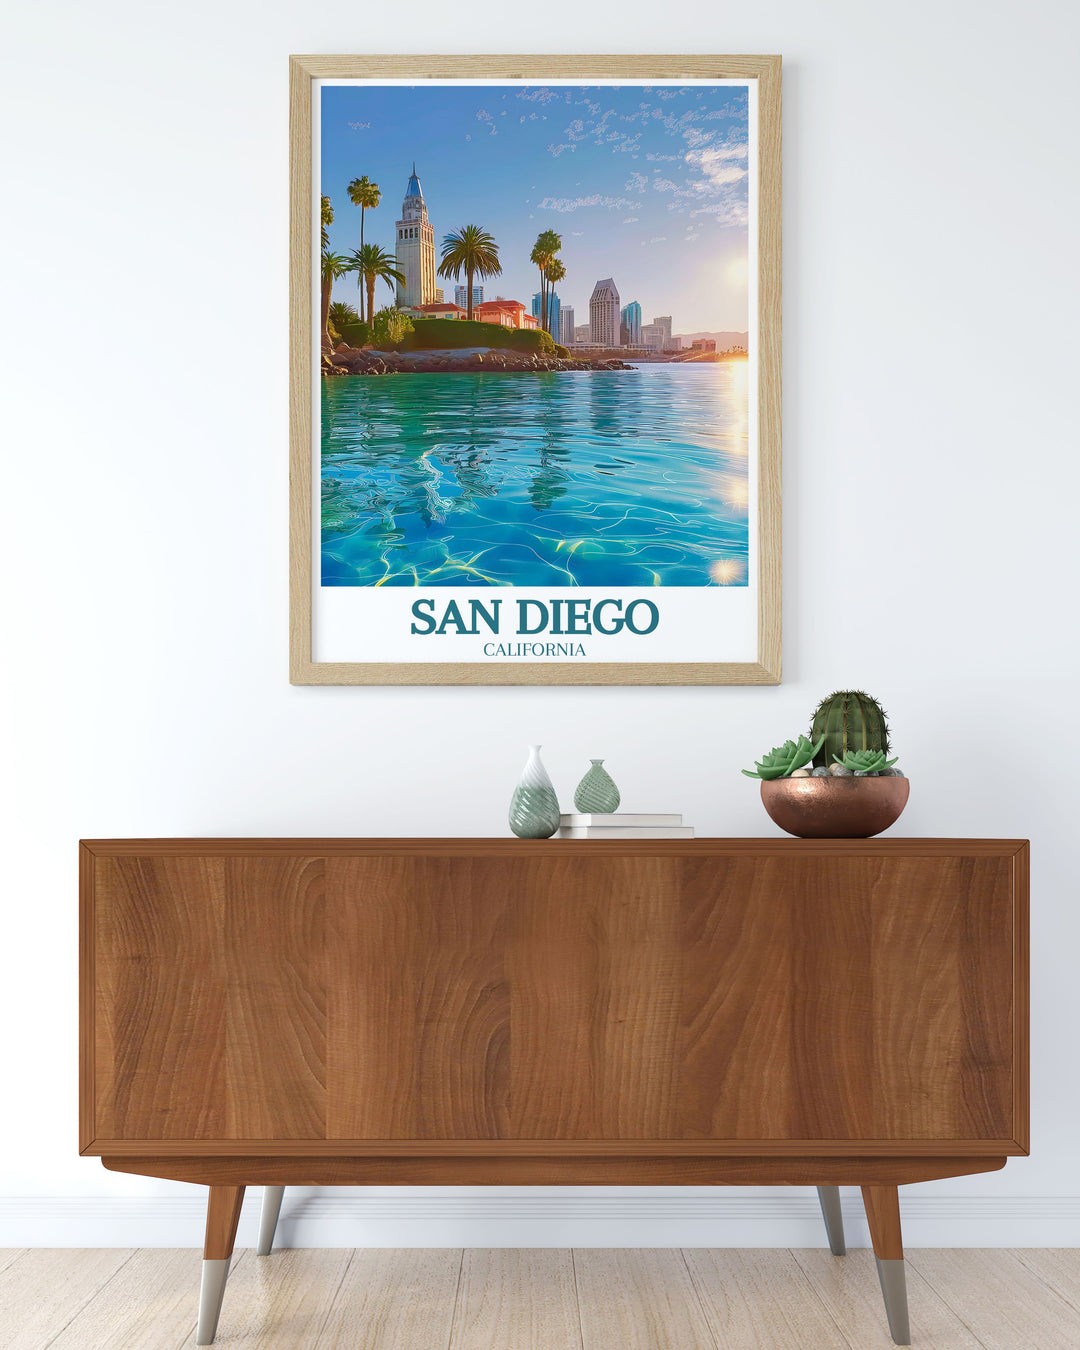 Enhance your home decor with San Diego beach artwork. This stunning print showcases the vibrant colors and serene atmosphere of Californias coastline. Perfect for those who appreciate California decor, this piece brings the essence of San Diego beach into your living space.